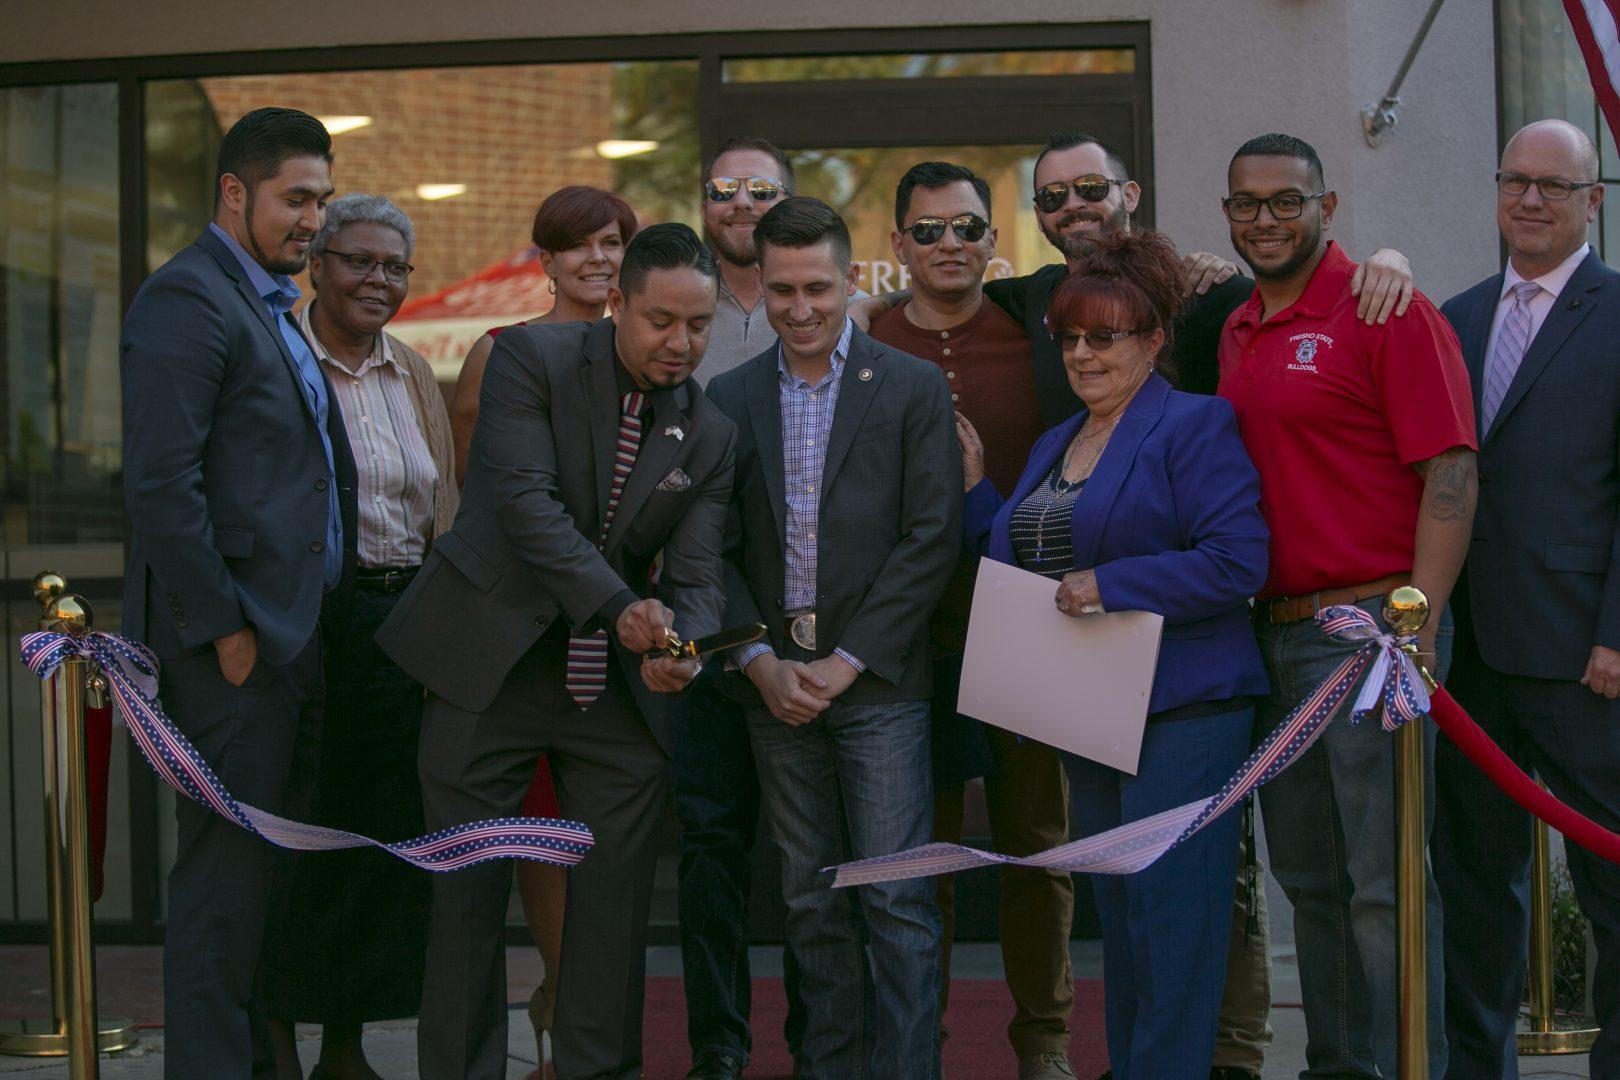 Faculty%2C+staff+and+veteran+students+cut+the+ribbon+during+the+grand+opening+of+the+Veterans+Resource+Center%2C+located+at+the+University+Center+room+101+on+Friday%2C+Nov.+15%2C+2019.+%28Anthony+De+Leon%2F+The+Collegian%29